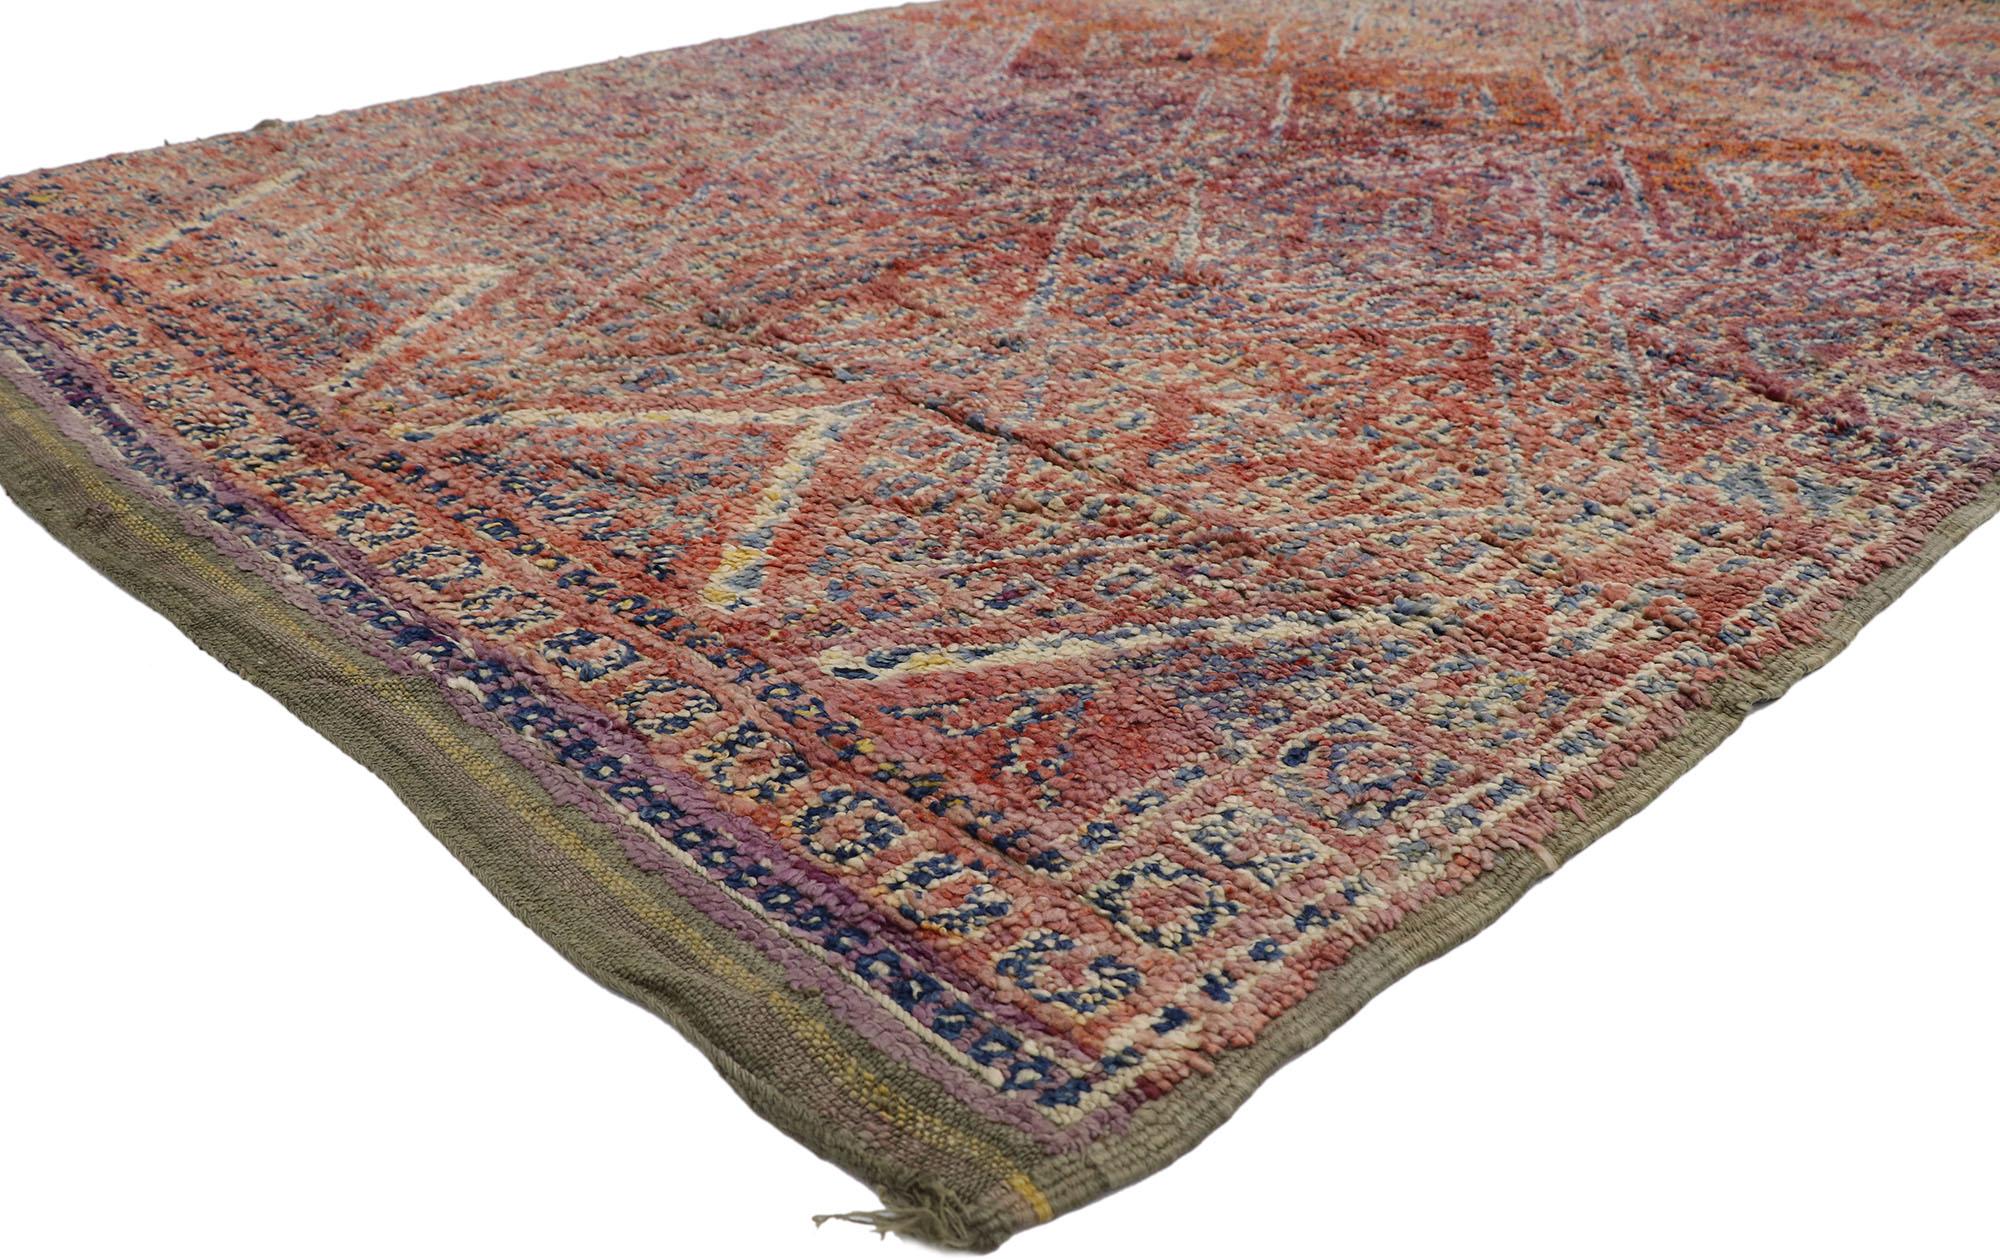 21432 Vintage Beni MGuild Moroccan Rug, 06'03 x 10'00.
Cozy nomad meets sultry bohemian style in this vintage Beni MGuild Moroccan rug. The highly decorative lattice design and alluring color palette woven into this piece work together creating a